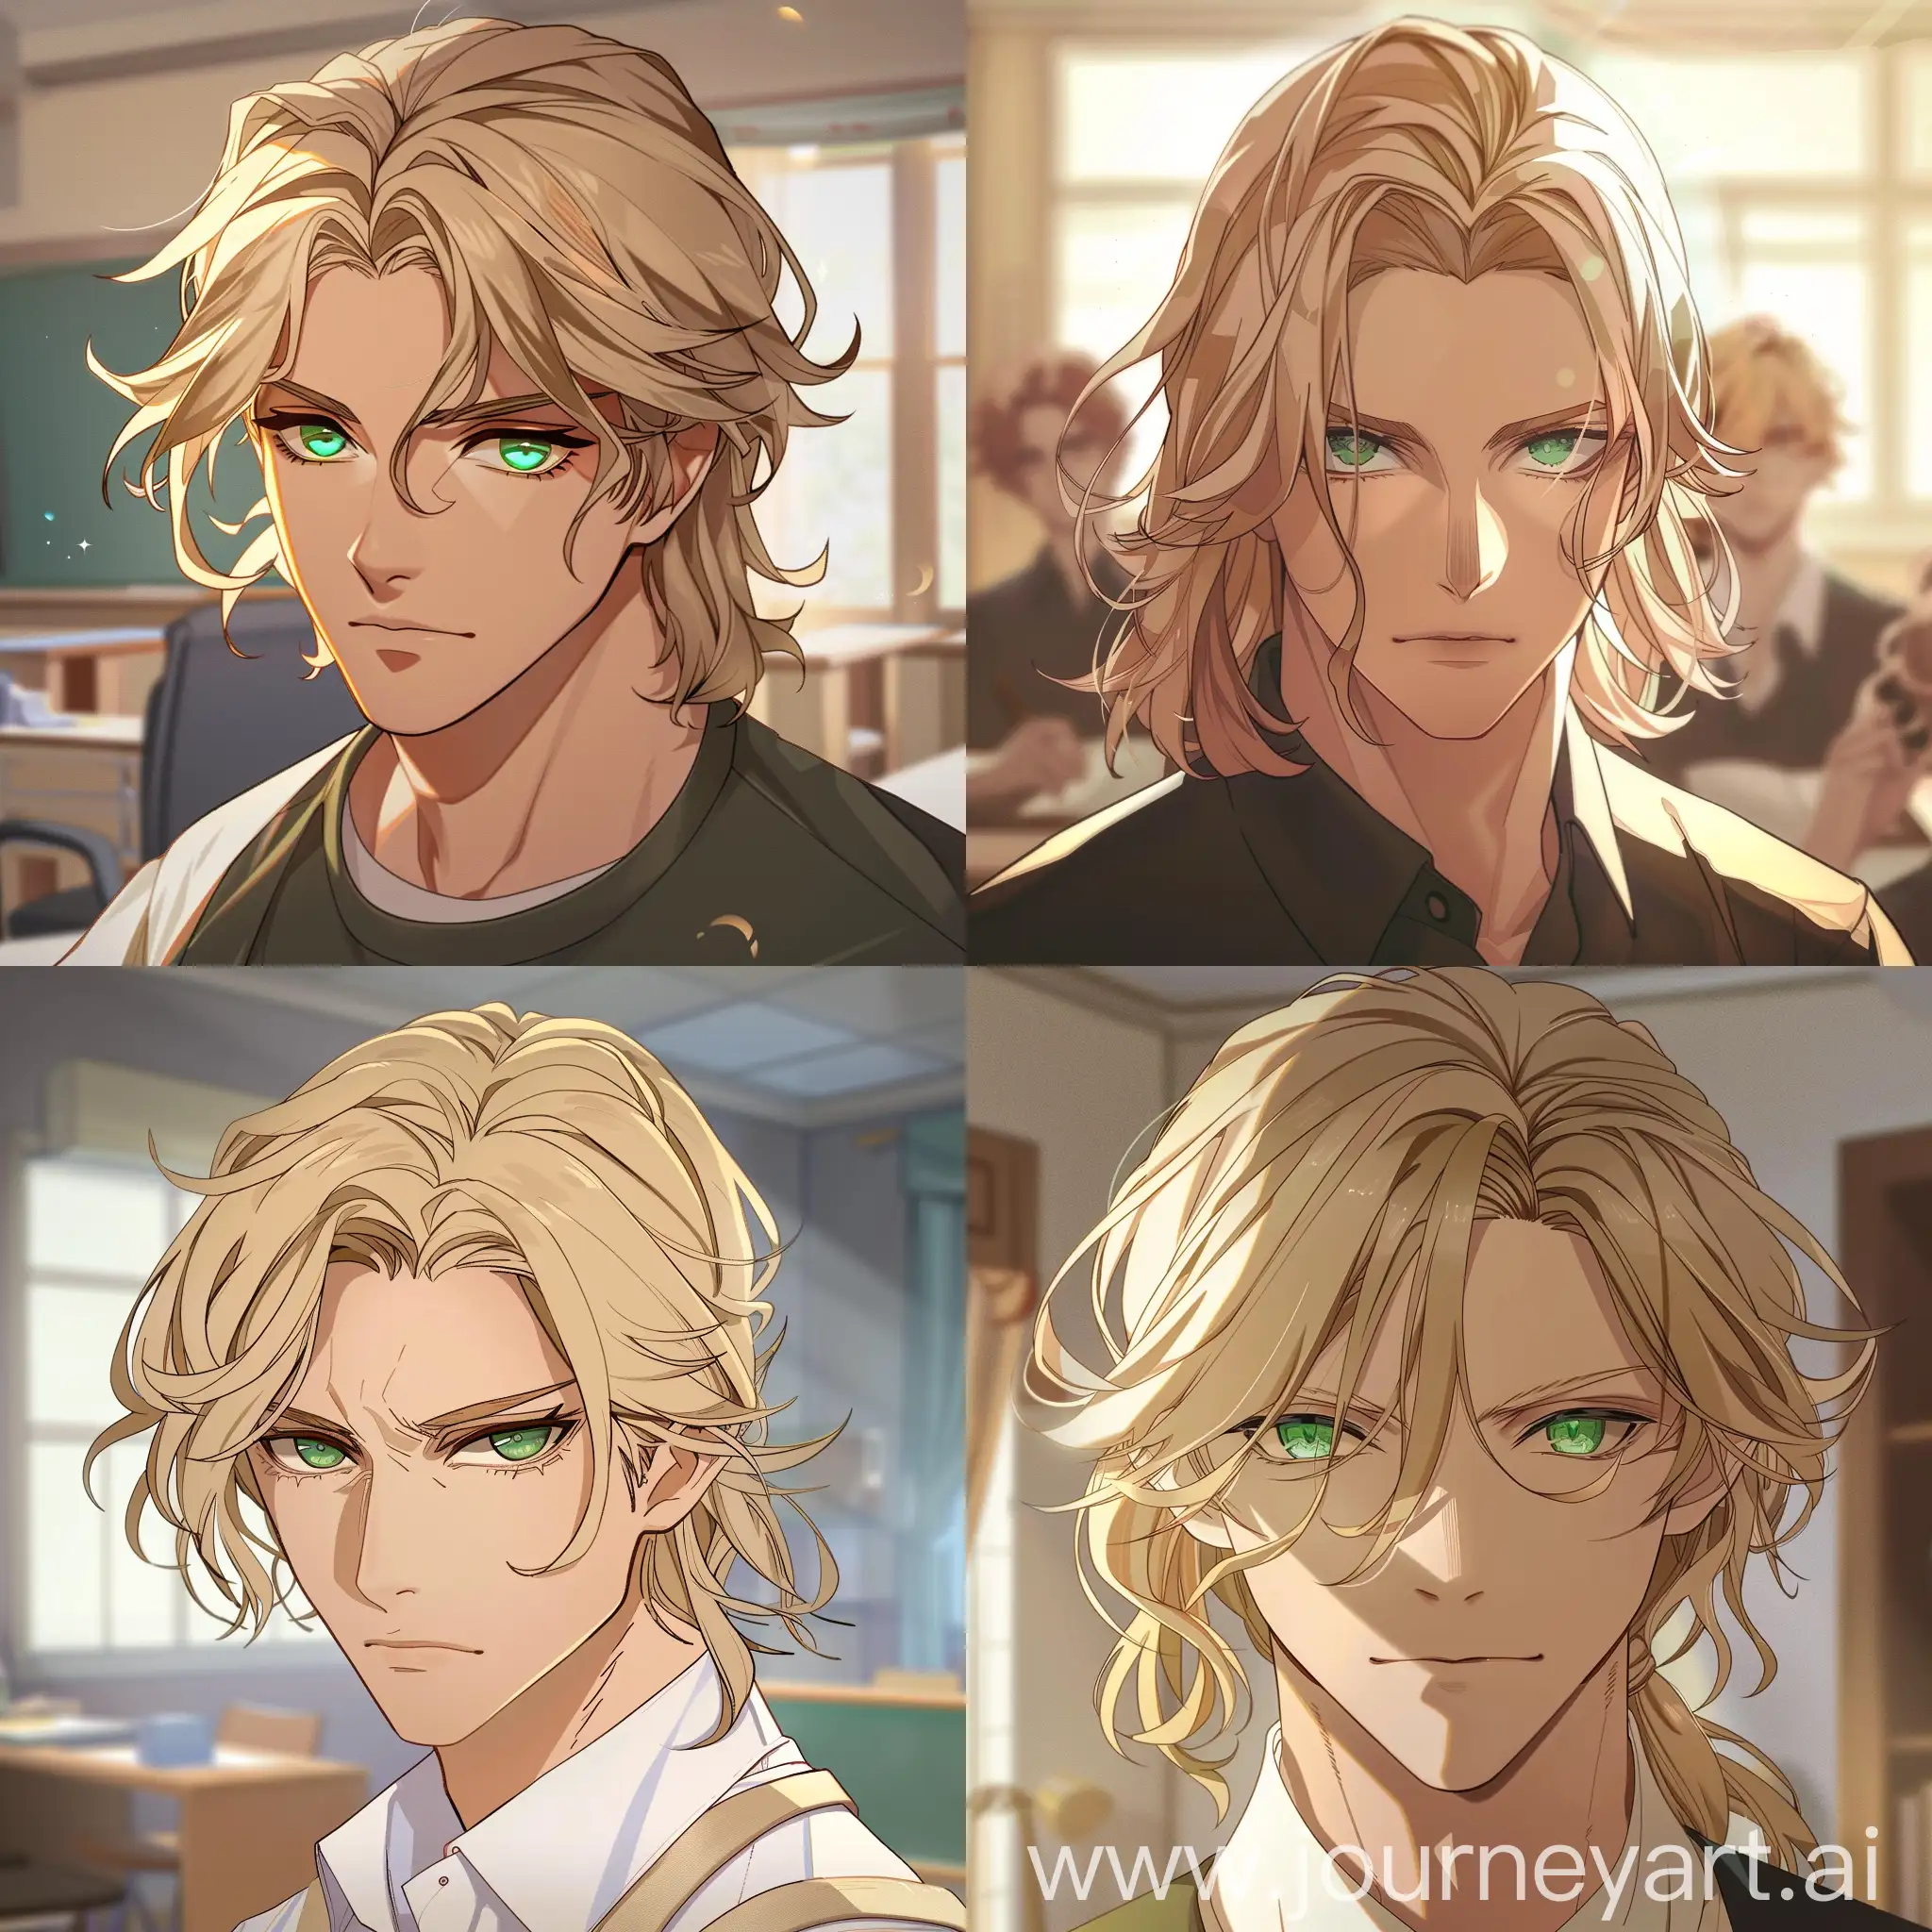 The man is blond with emerald green eyes. He has shoulder-length hair in a low ponytail, with half of his bangs pulled back and the other half on the right over his eye. He is a teacher teaching a lesson.